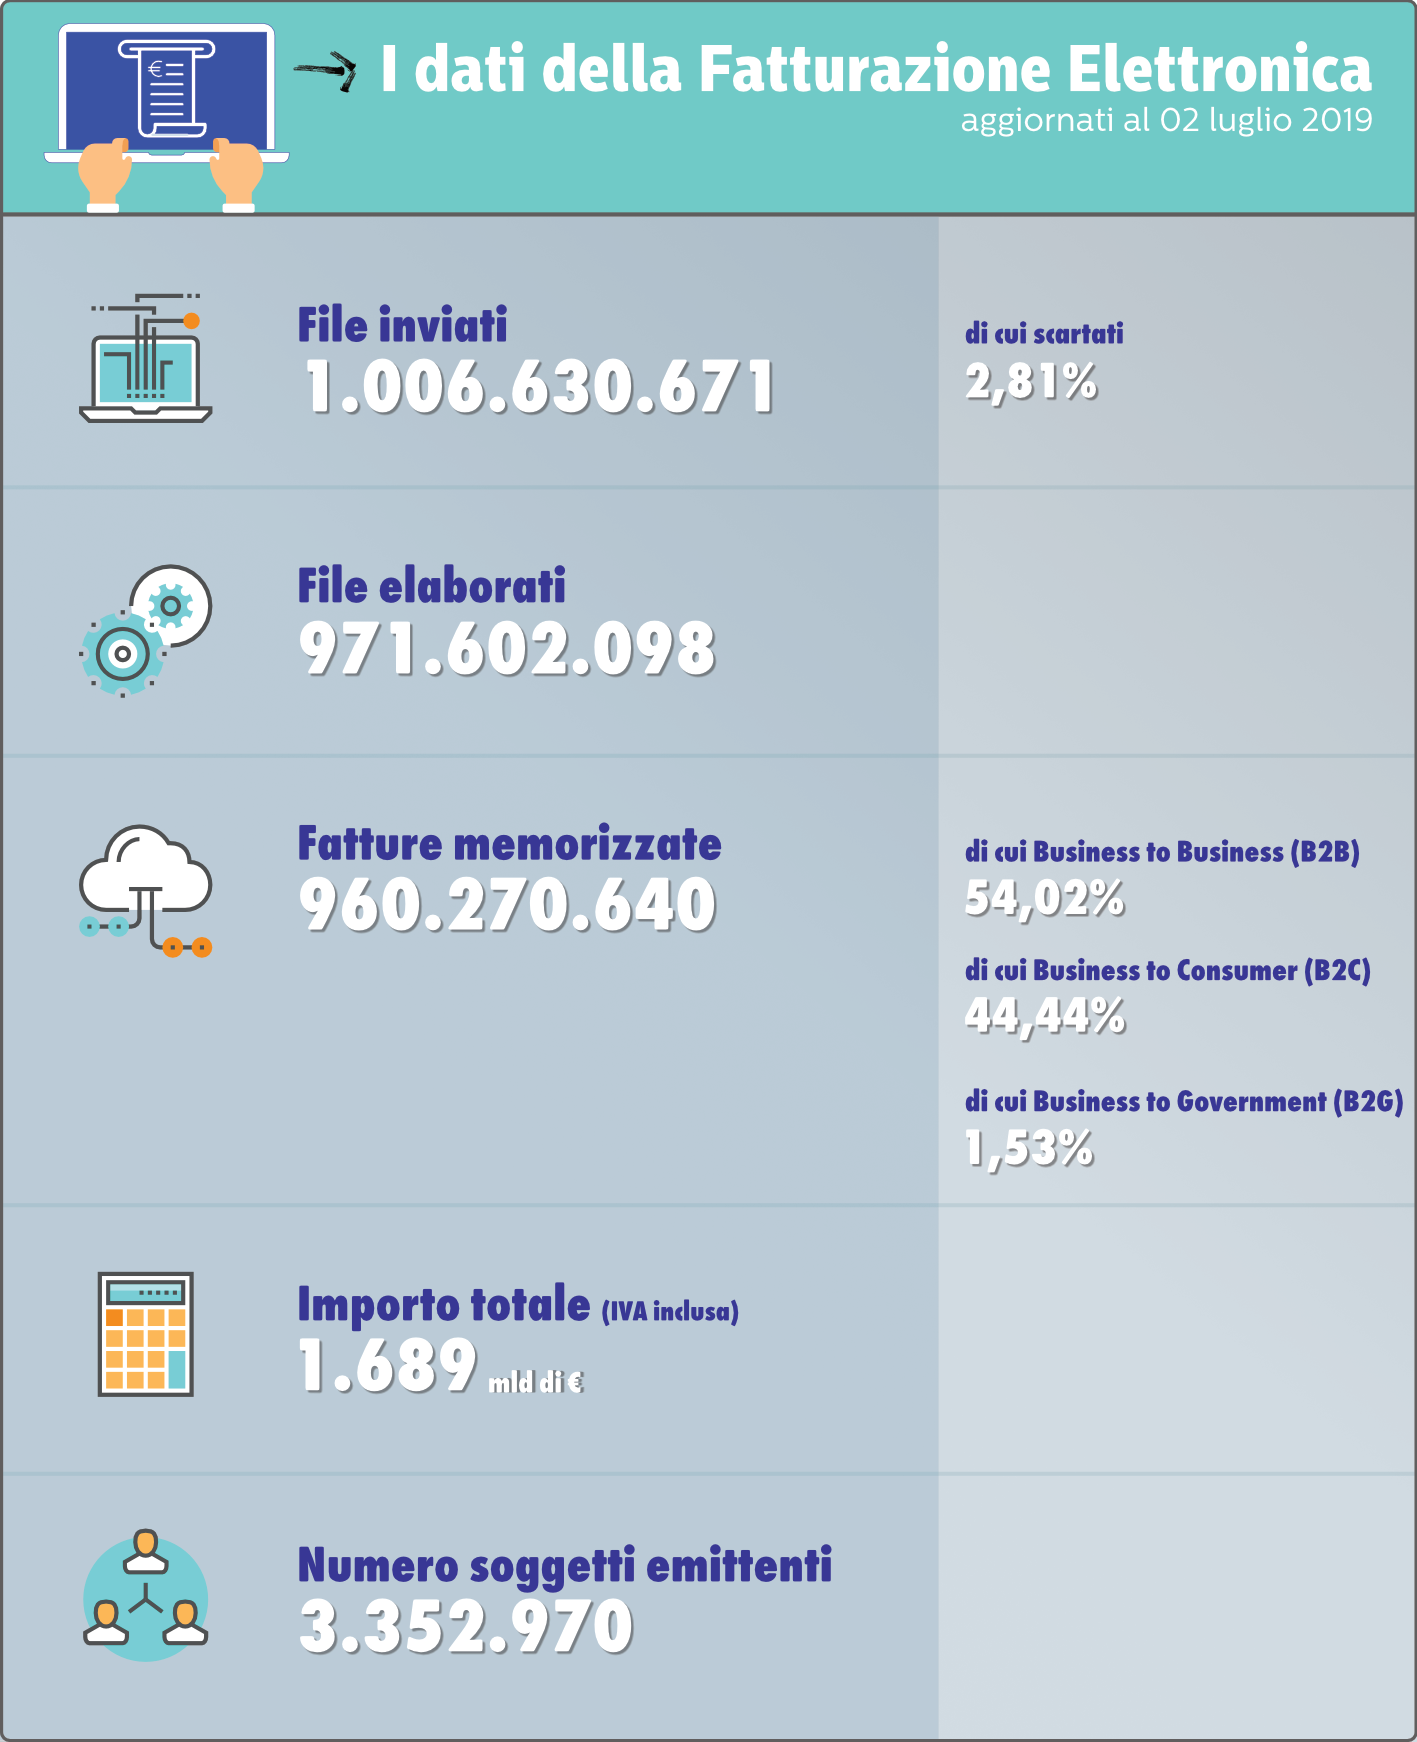 Infographic showing data on electronic invoicing to 2nd July